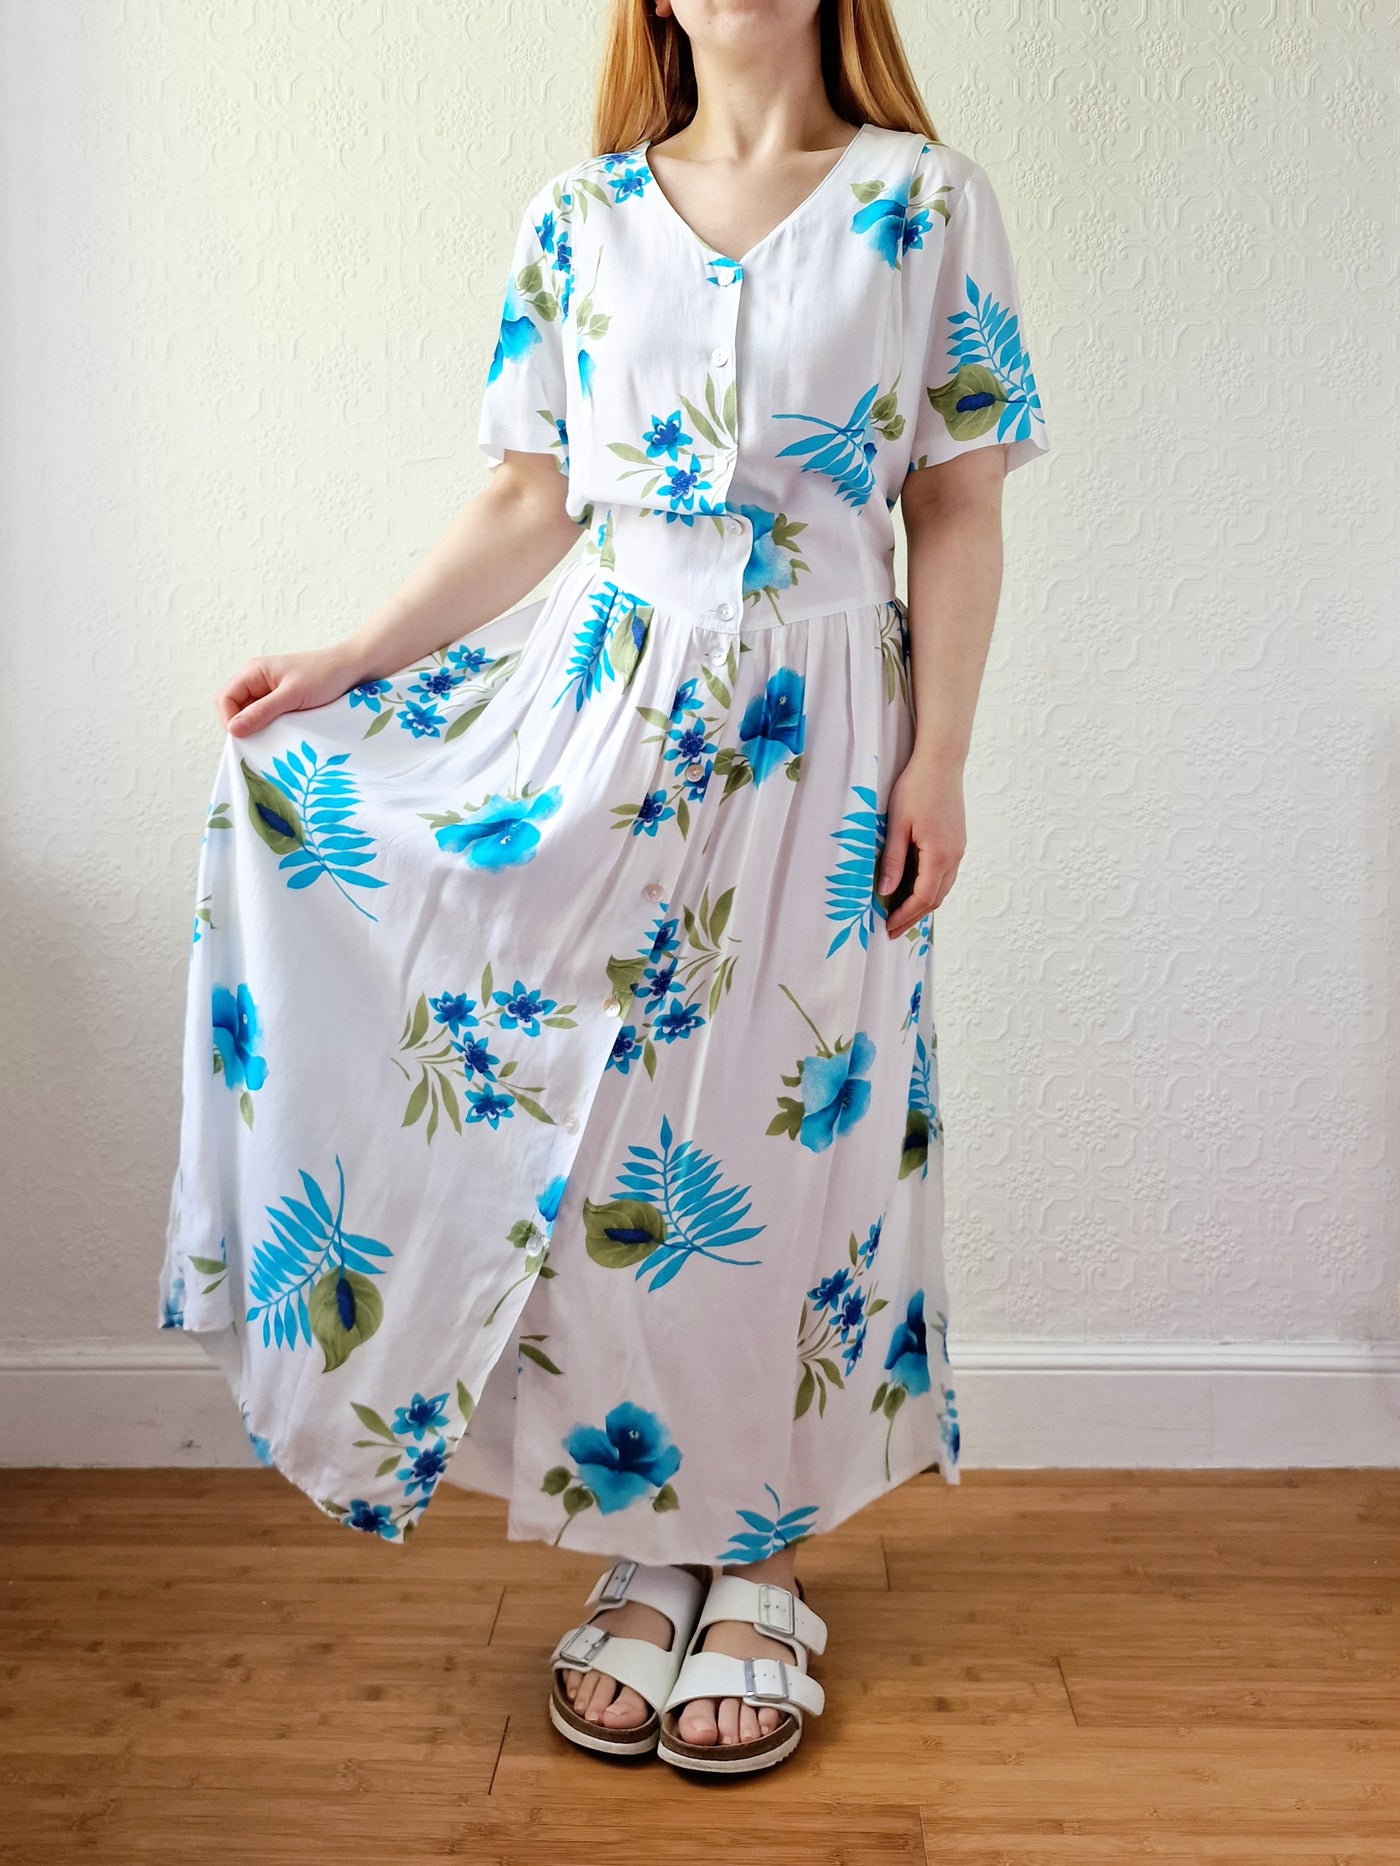 Vintage 90s White & Blue Floral Midi Dress with Short Sleeves - XL